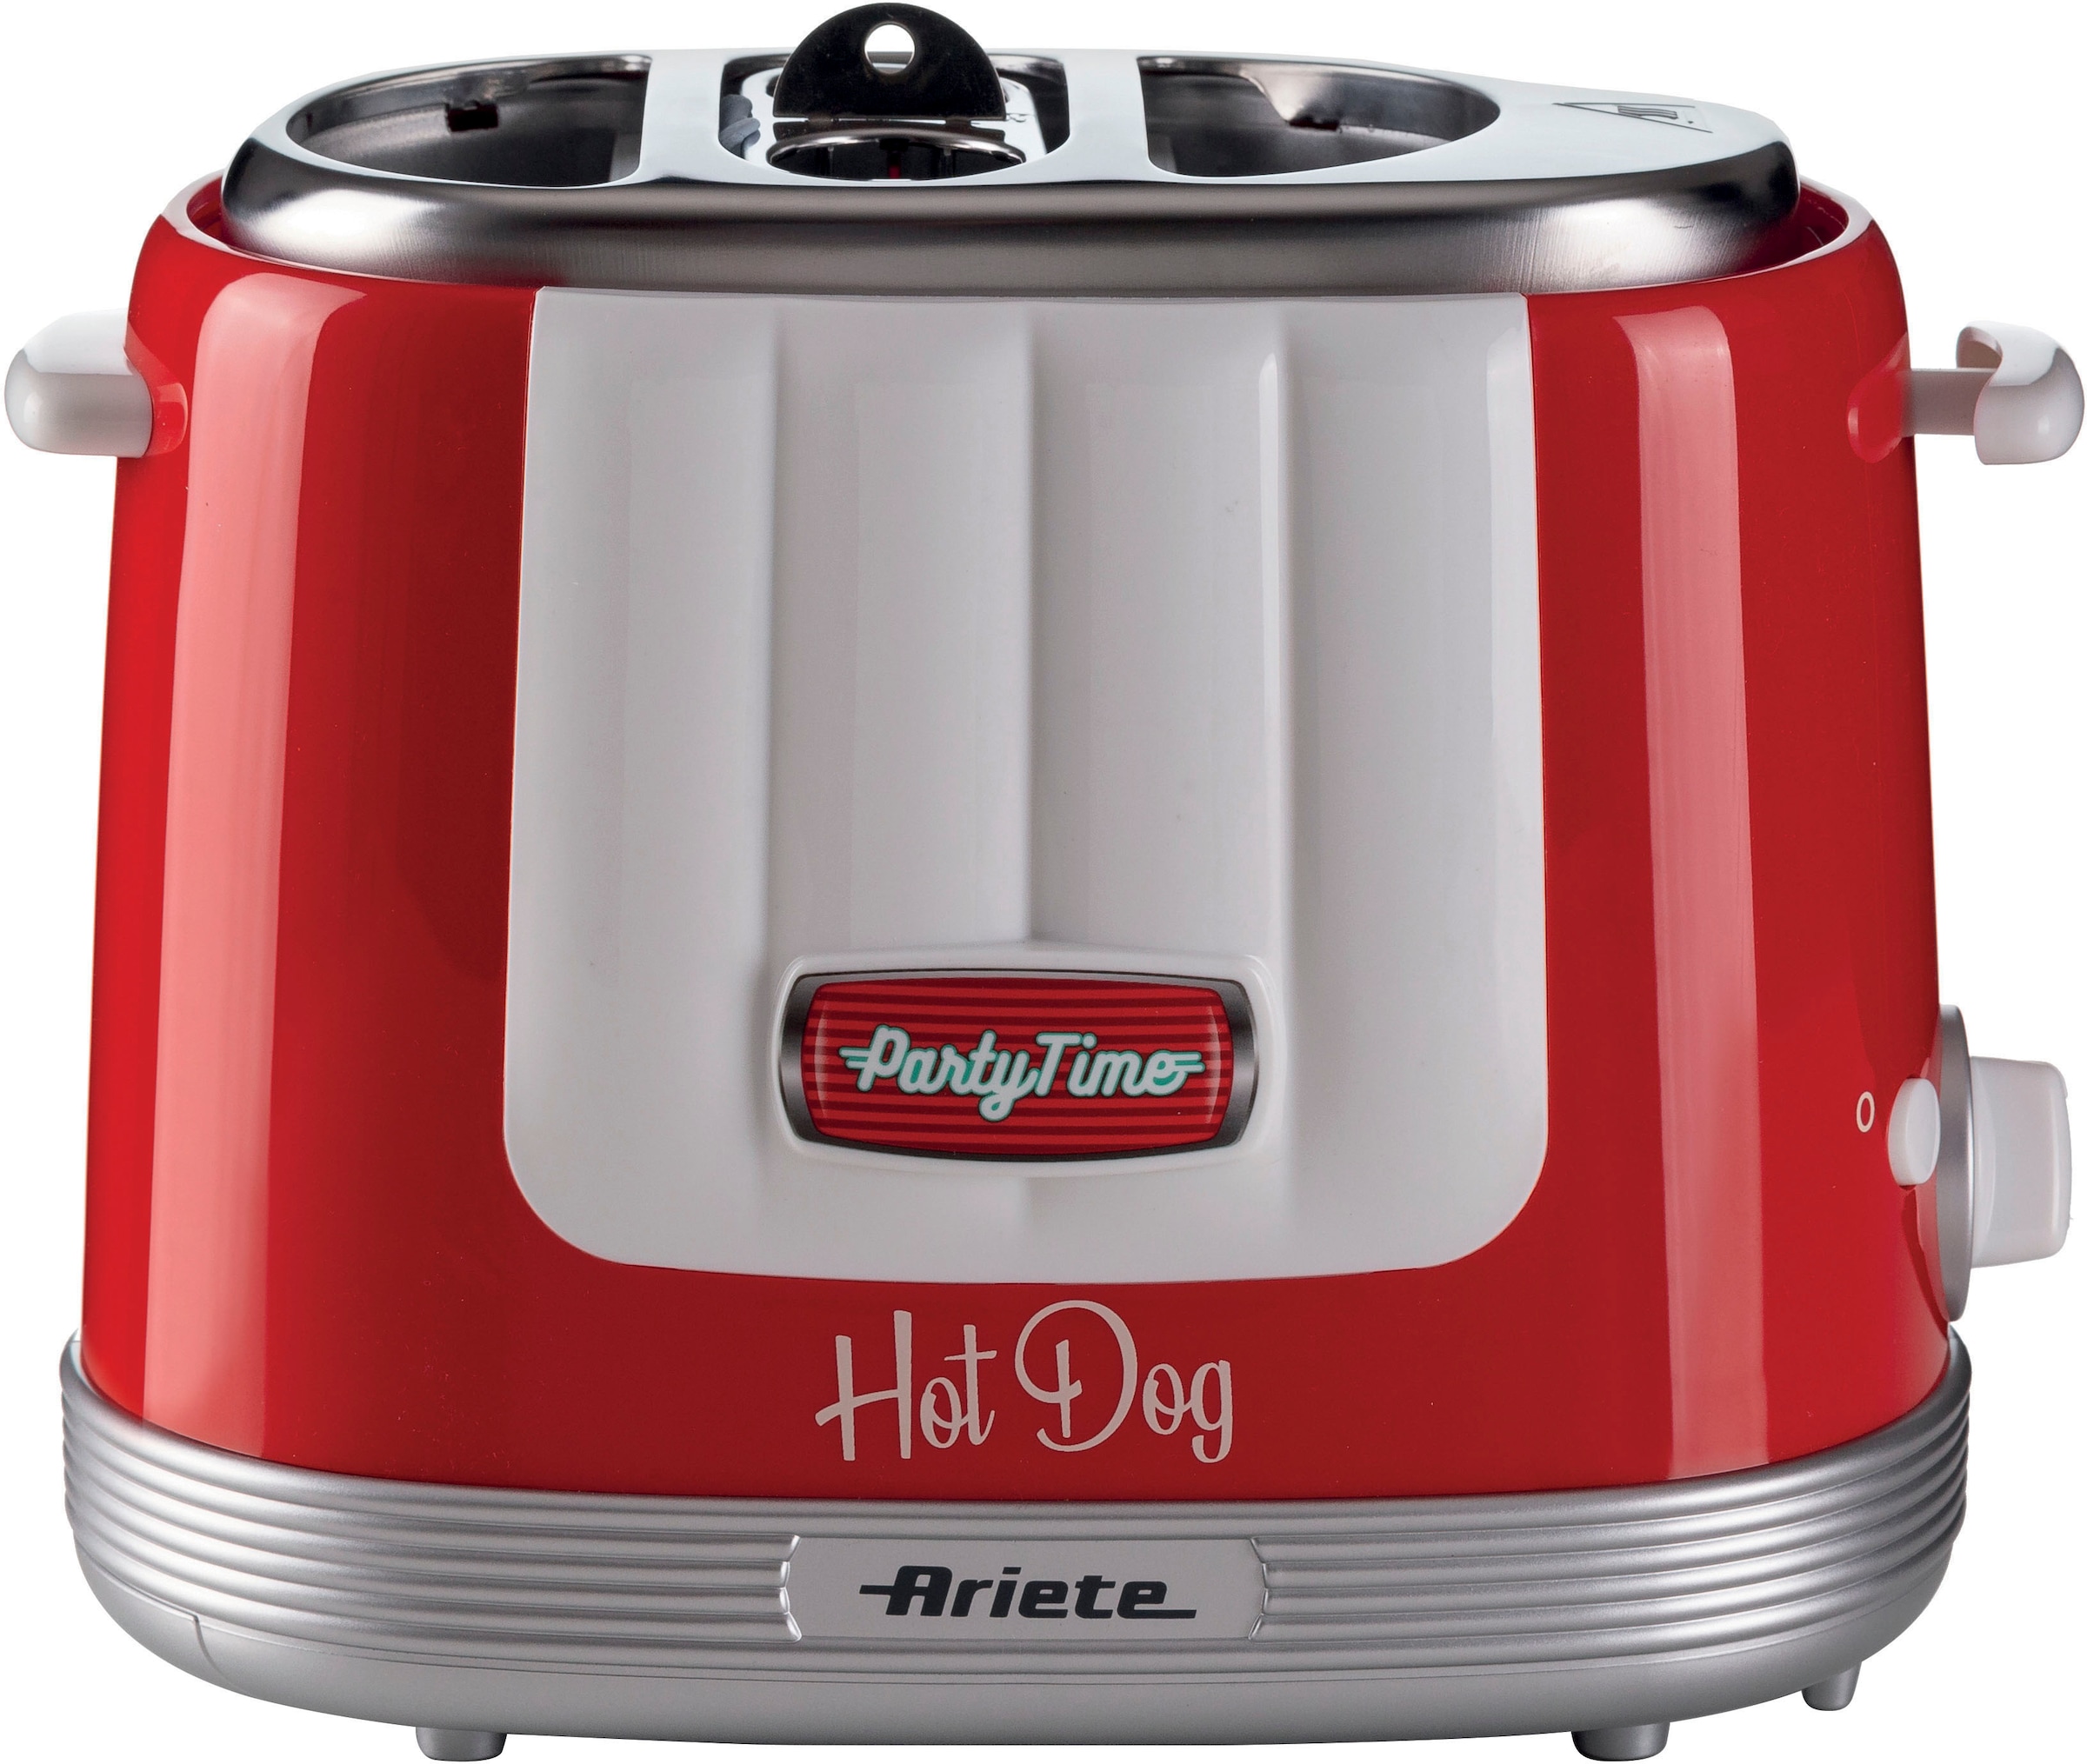 Hotdog-Maker »206R Party Time rot«, 650 W